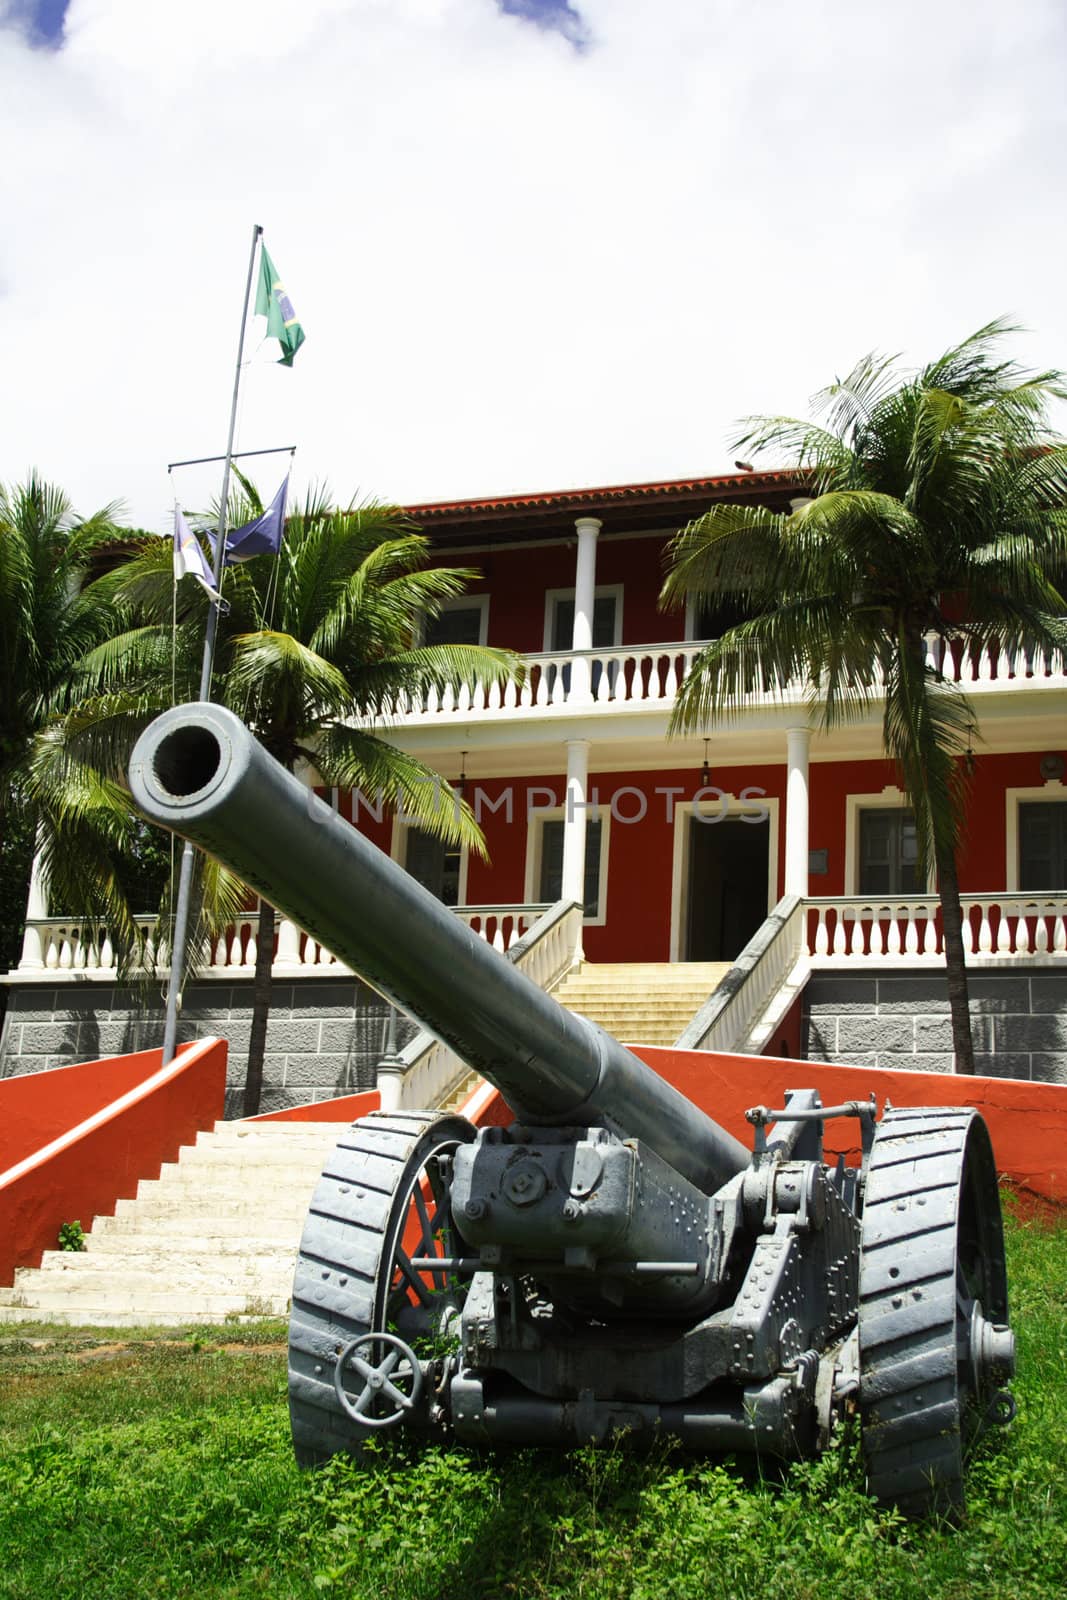 Fernando de Noronha's city hall. A red building with cannons.